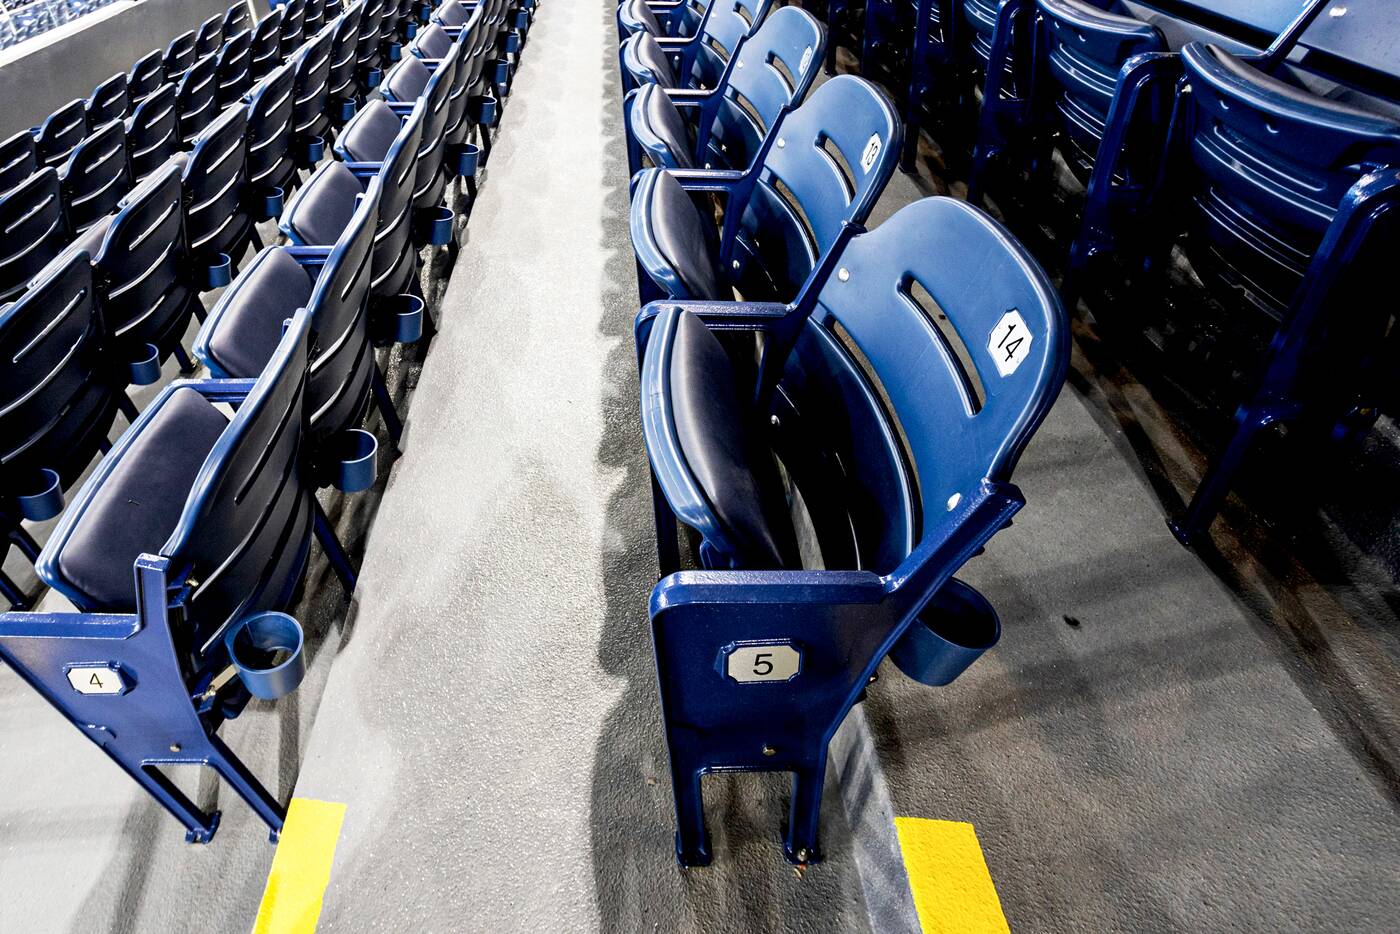 rogers centre seating